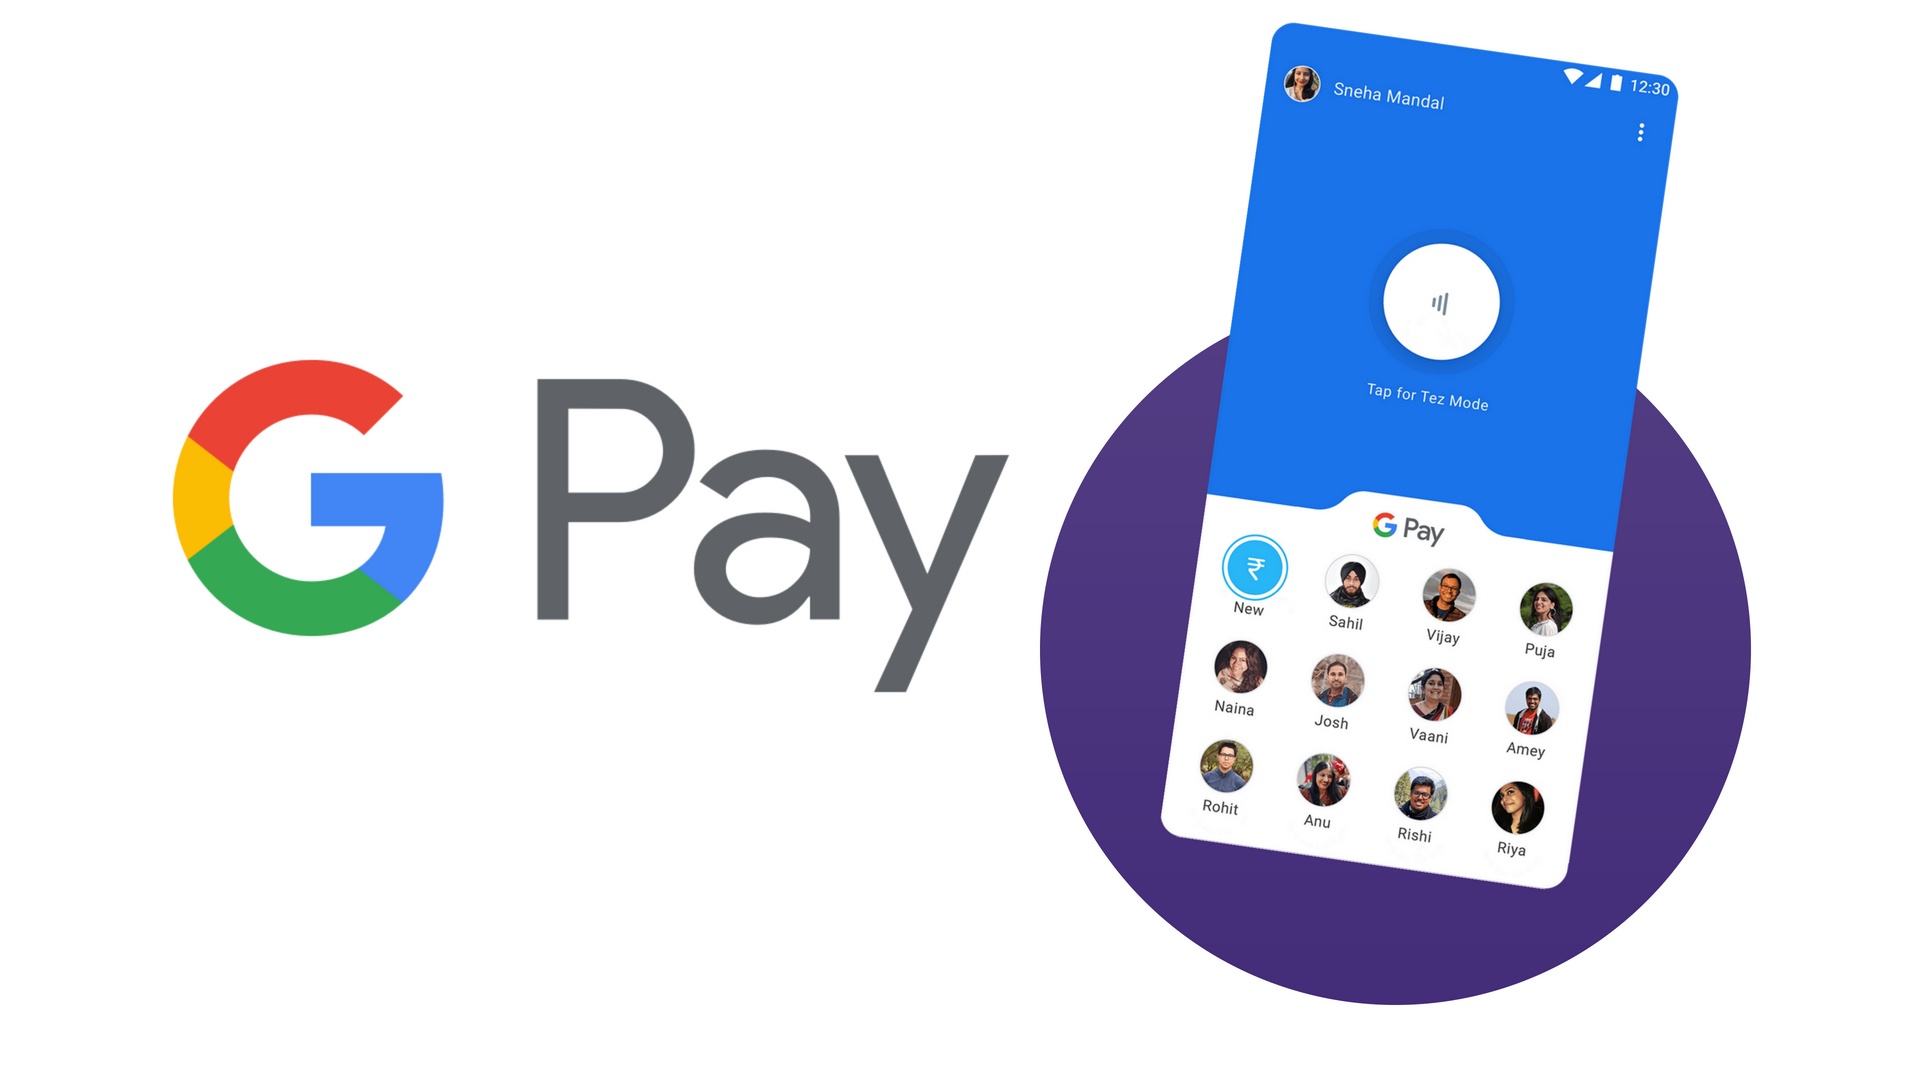 Tez rebranded as Google Pay